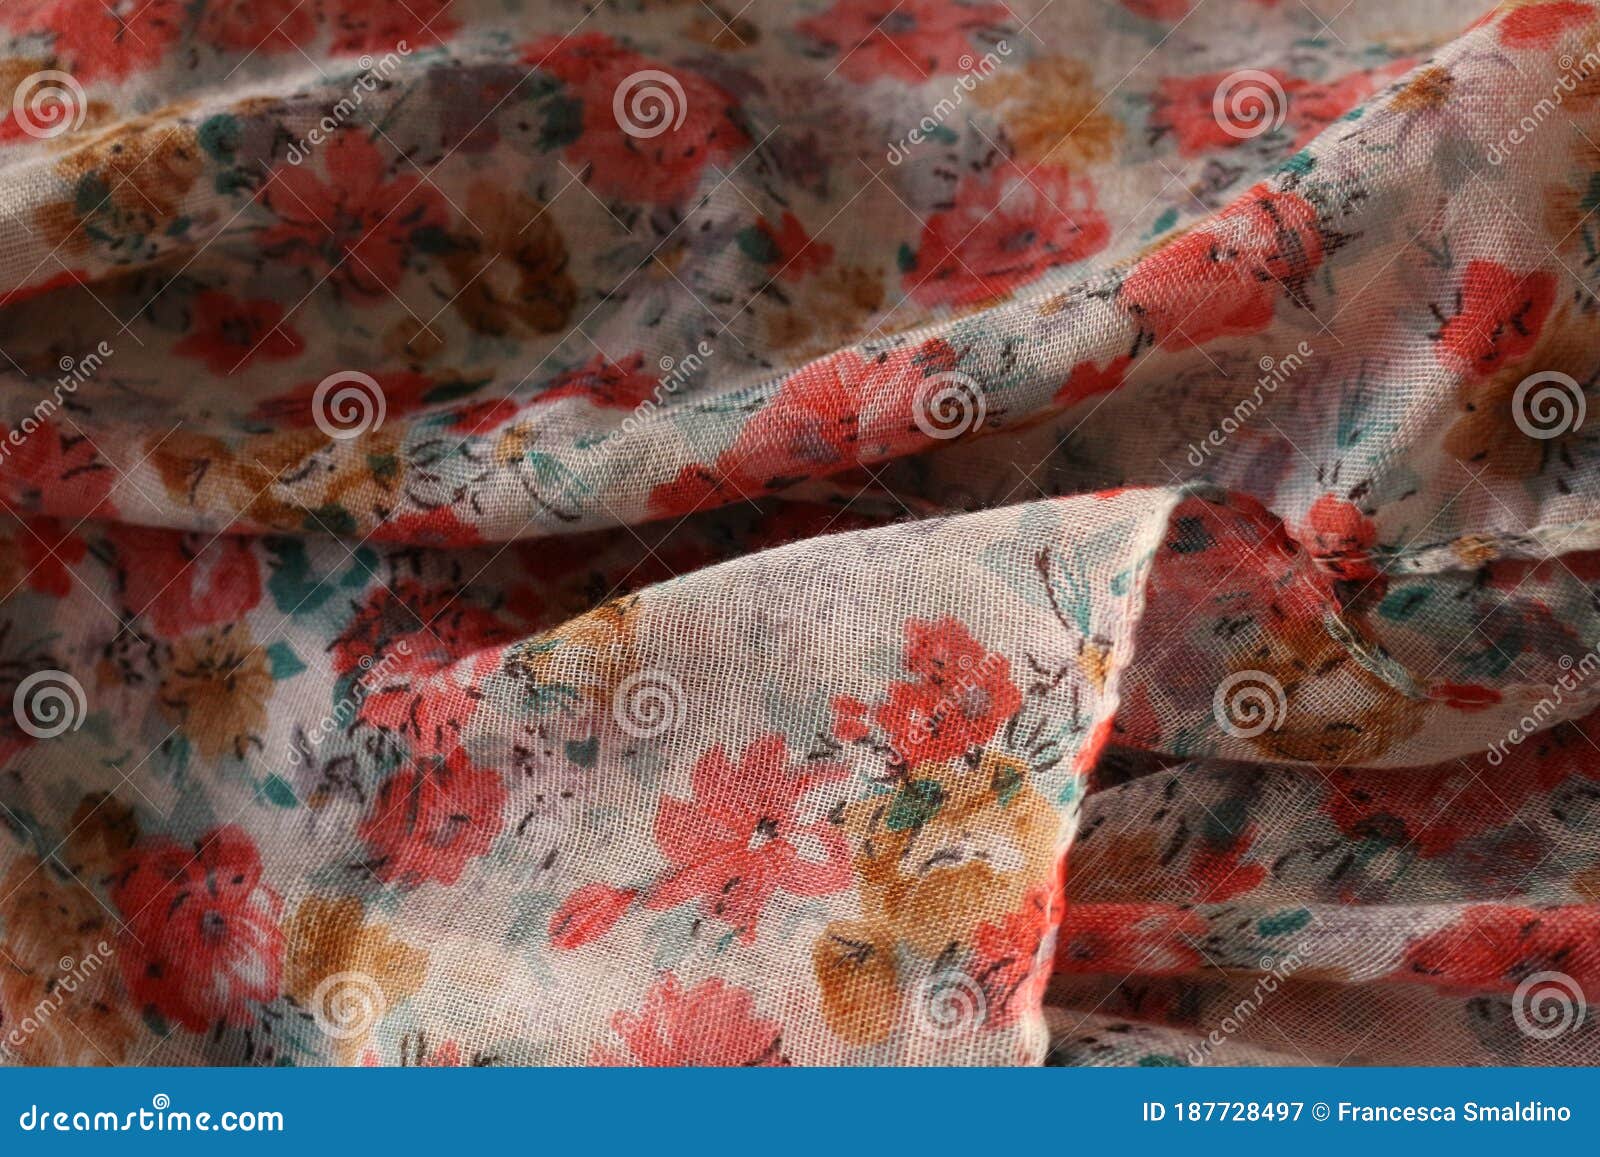 fabric decorated with fantasy s, texture